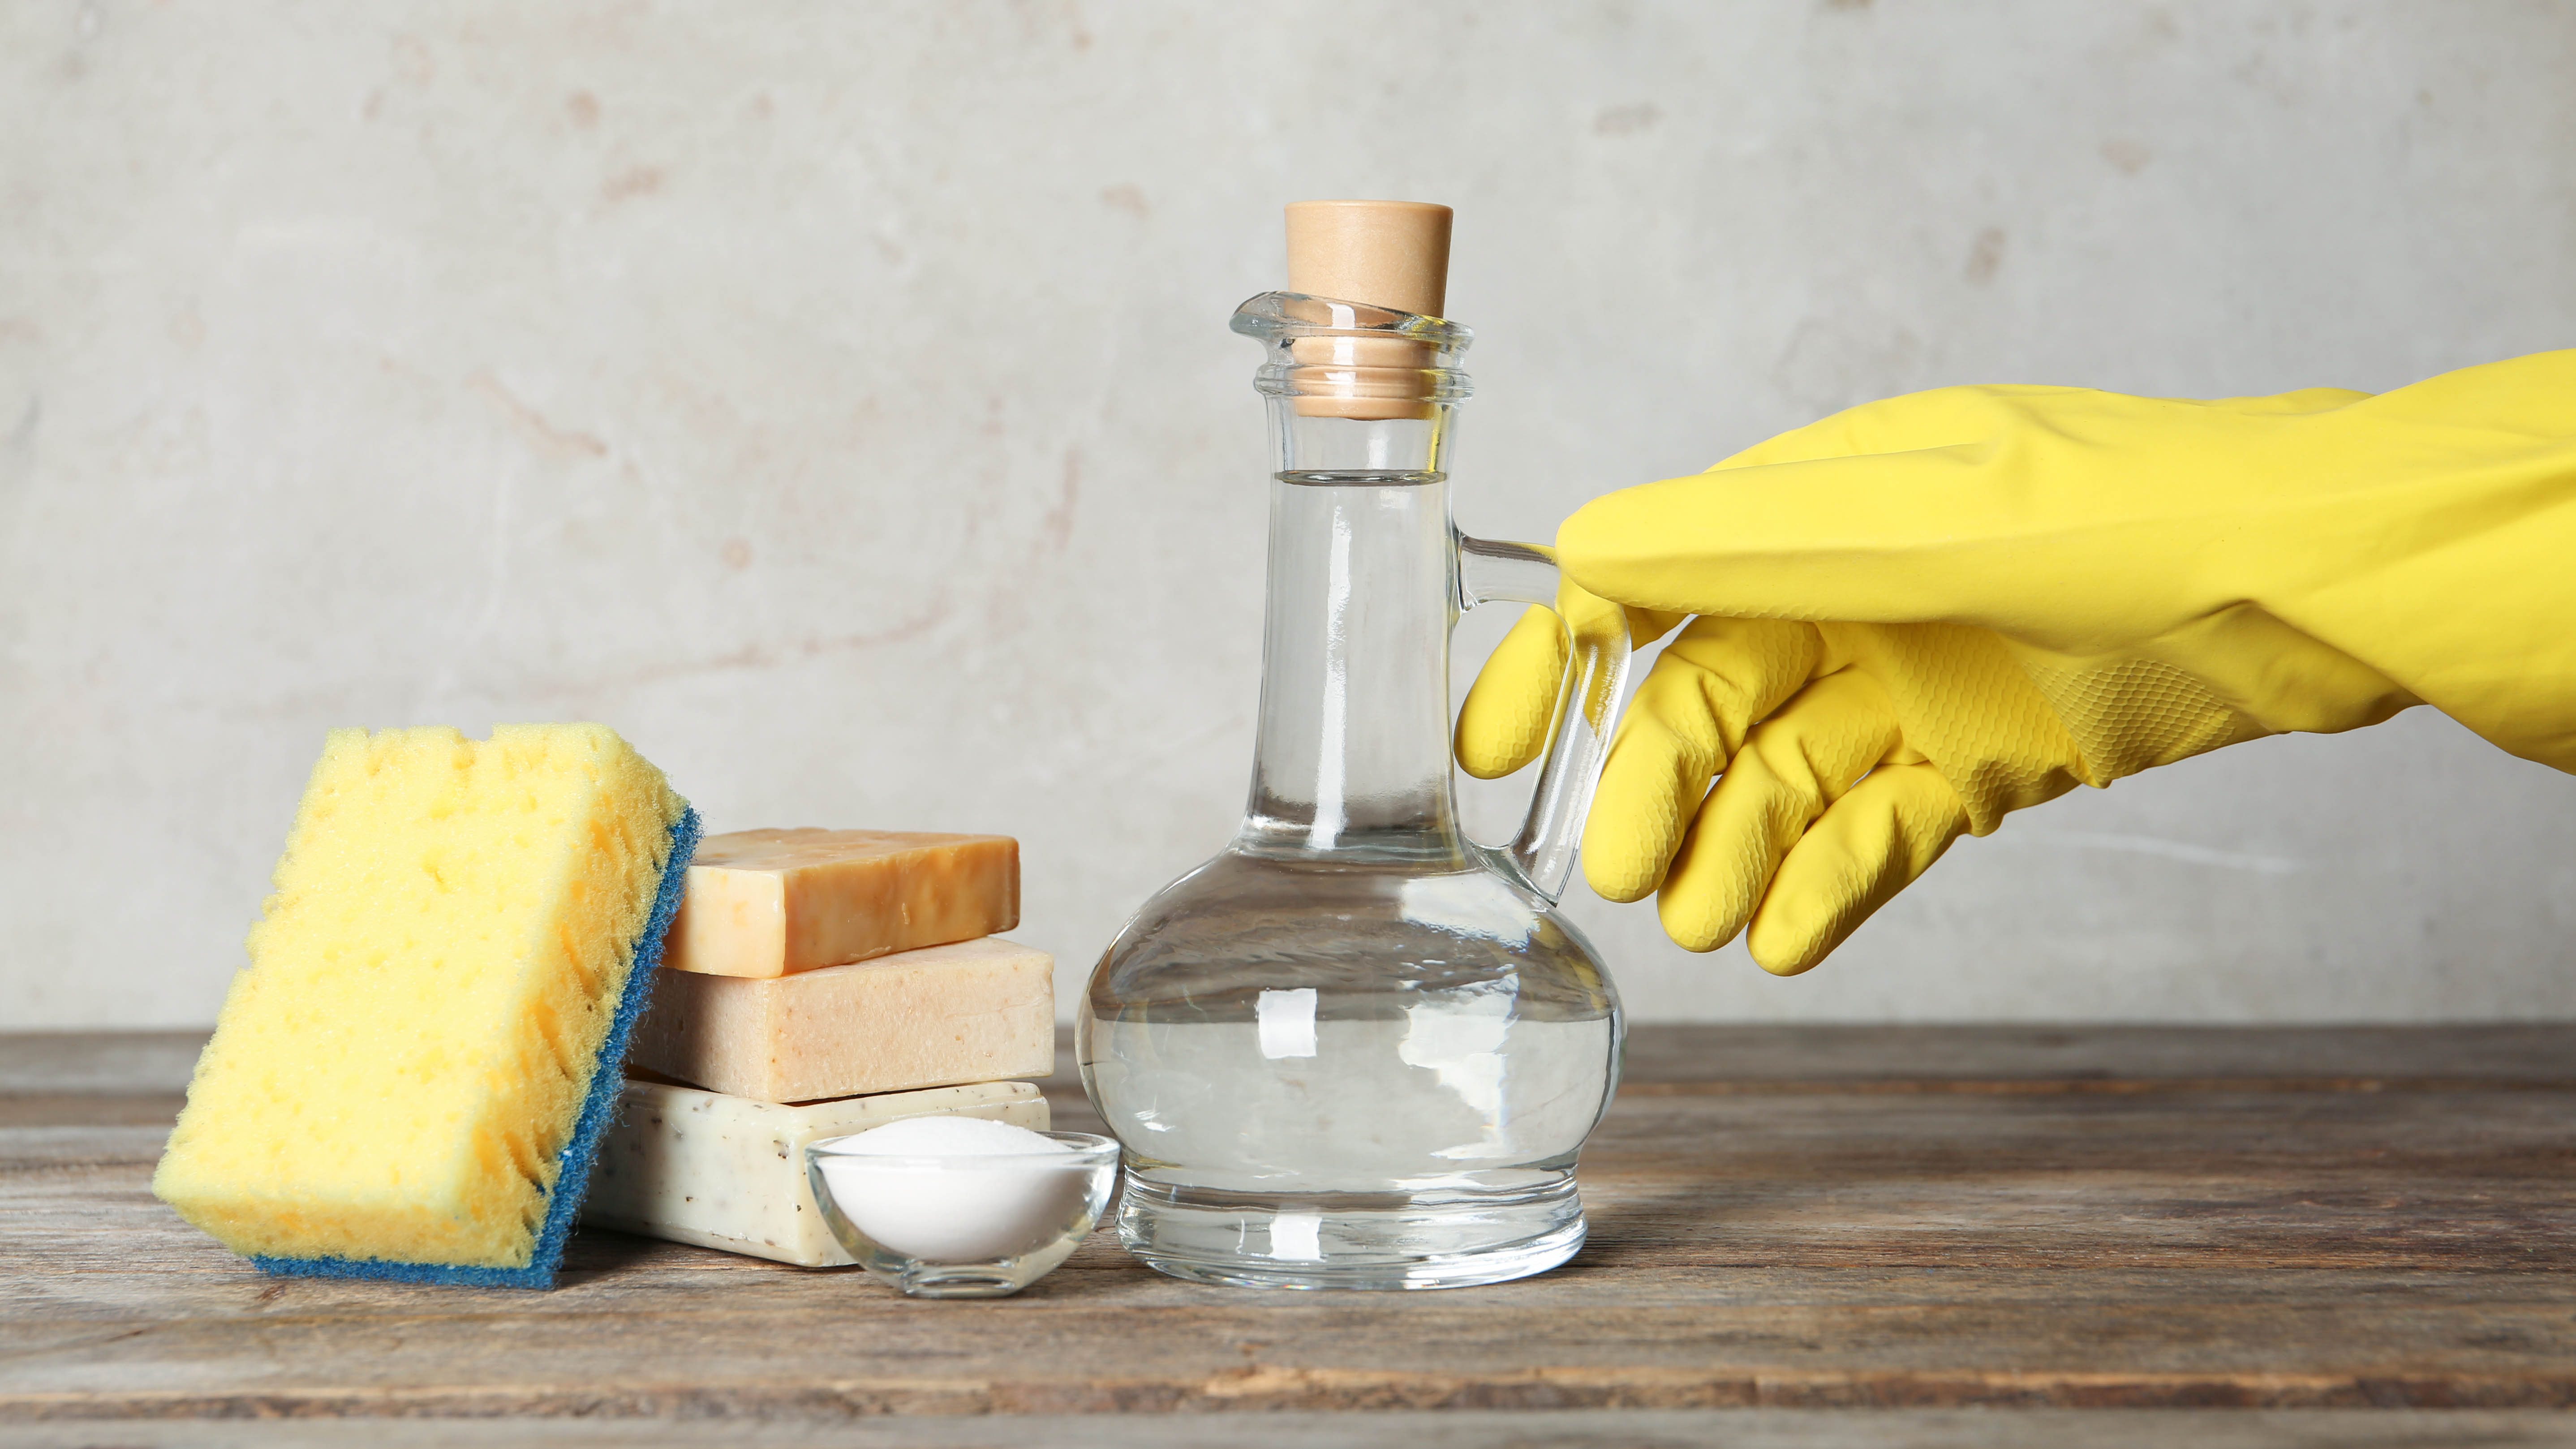 A gloved hand reaches for a stoppered jug of distilled white vinegar next to a sponge and baking soda